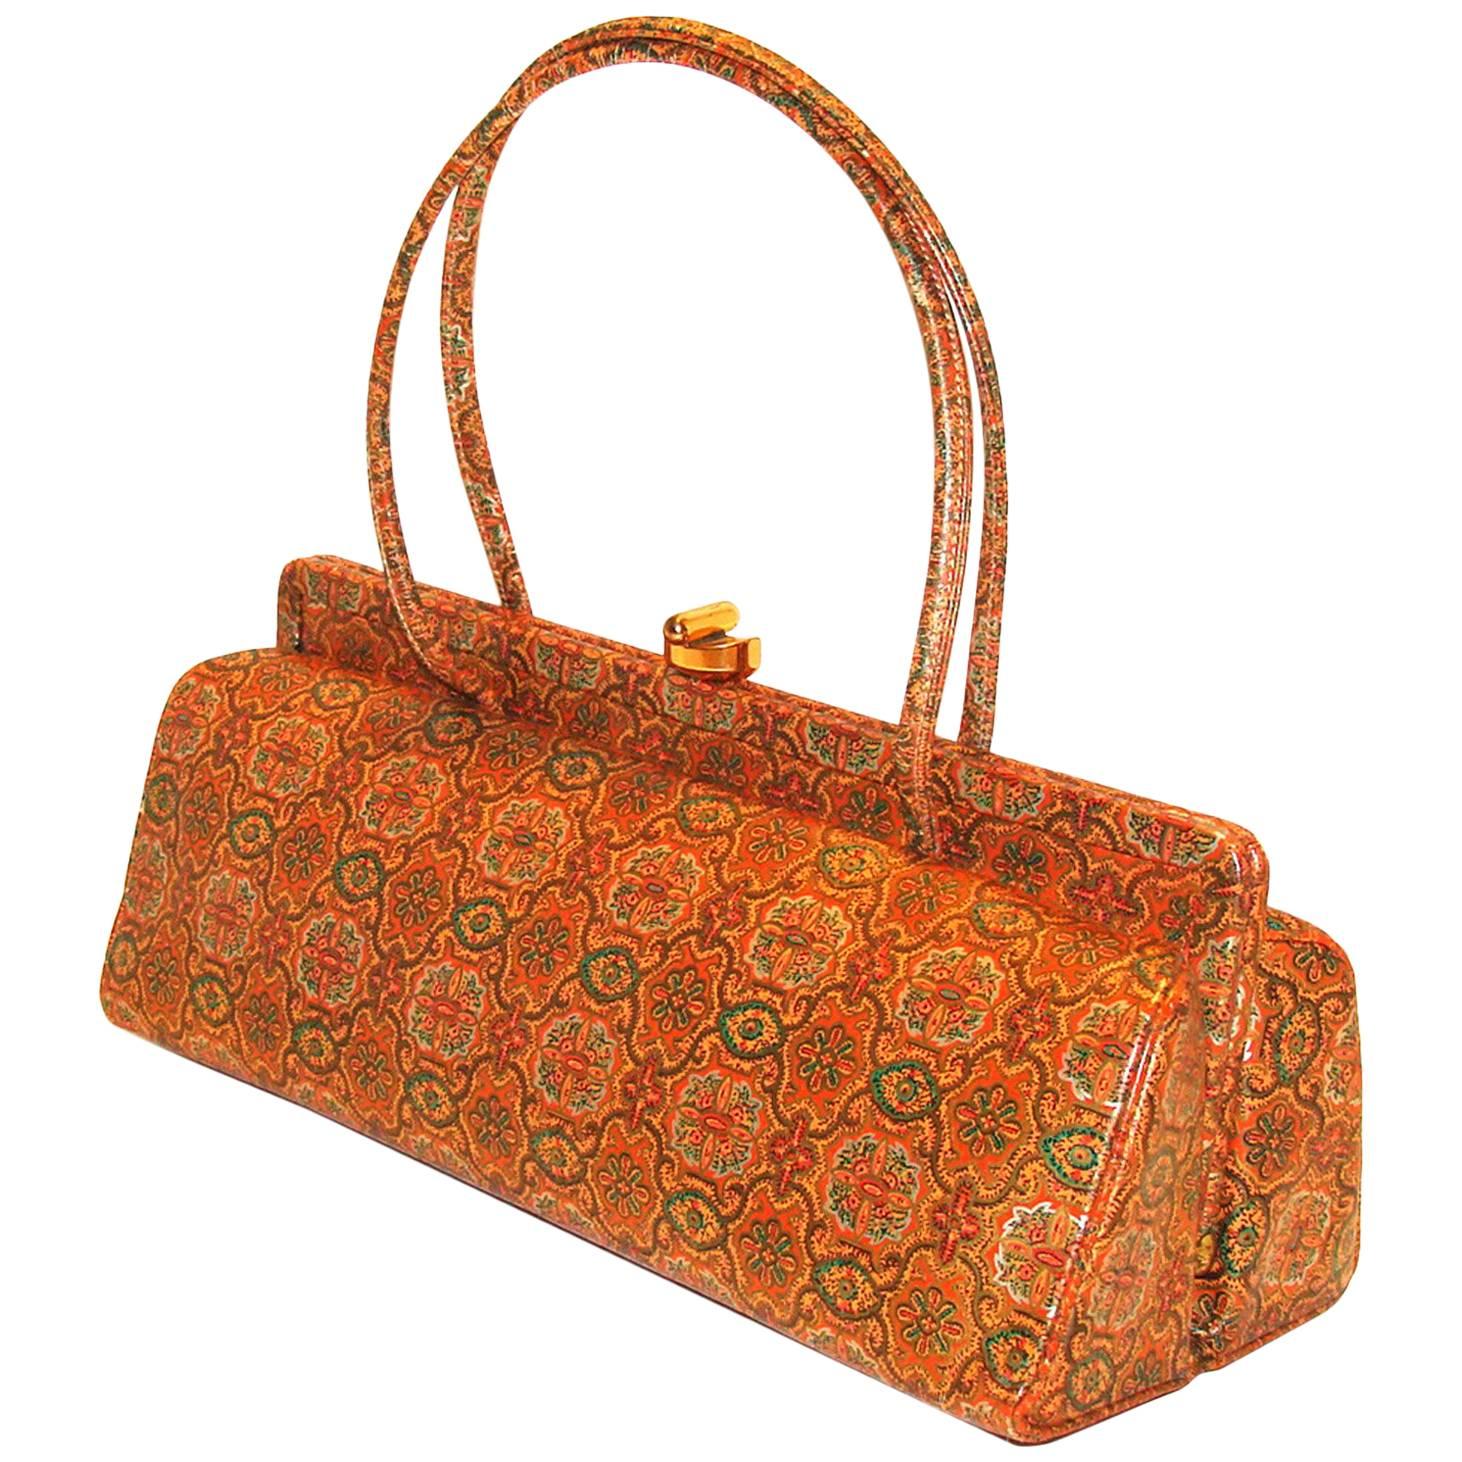 Rare Structured Printed Leather Bag by Holzman FALL For Sale